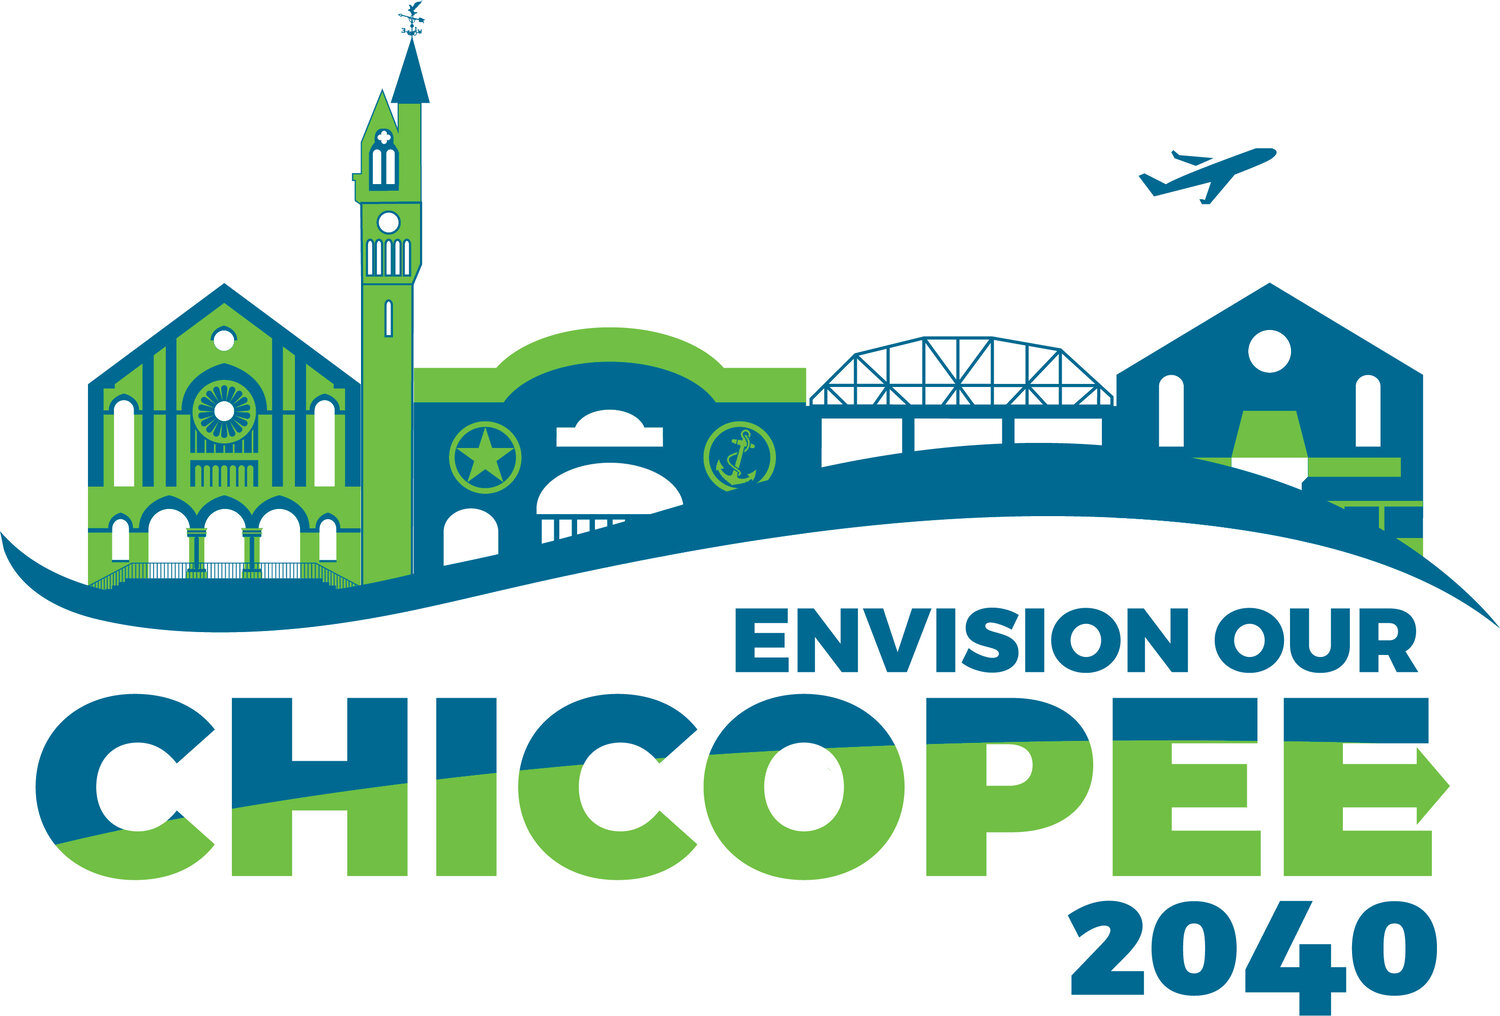 Envision Our Chicopee: 2040